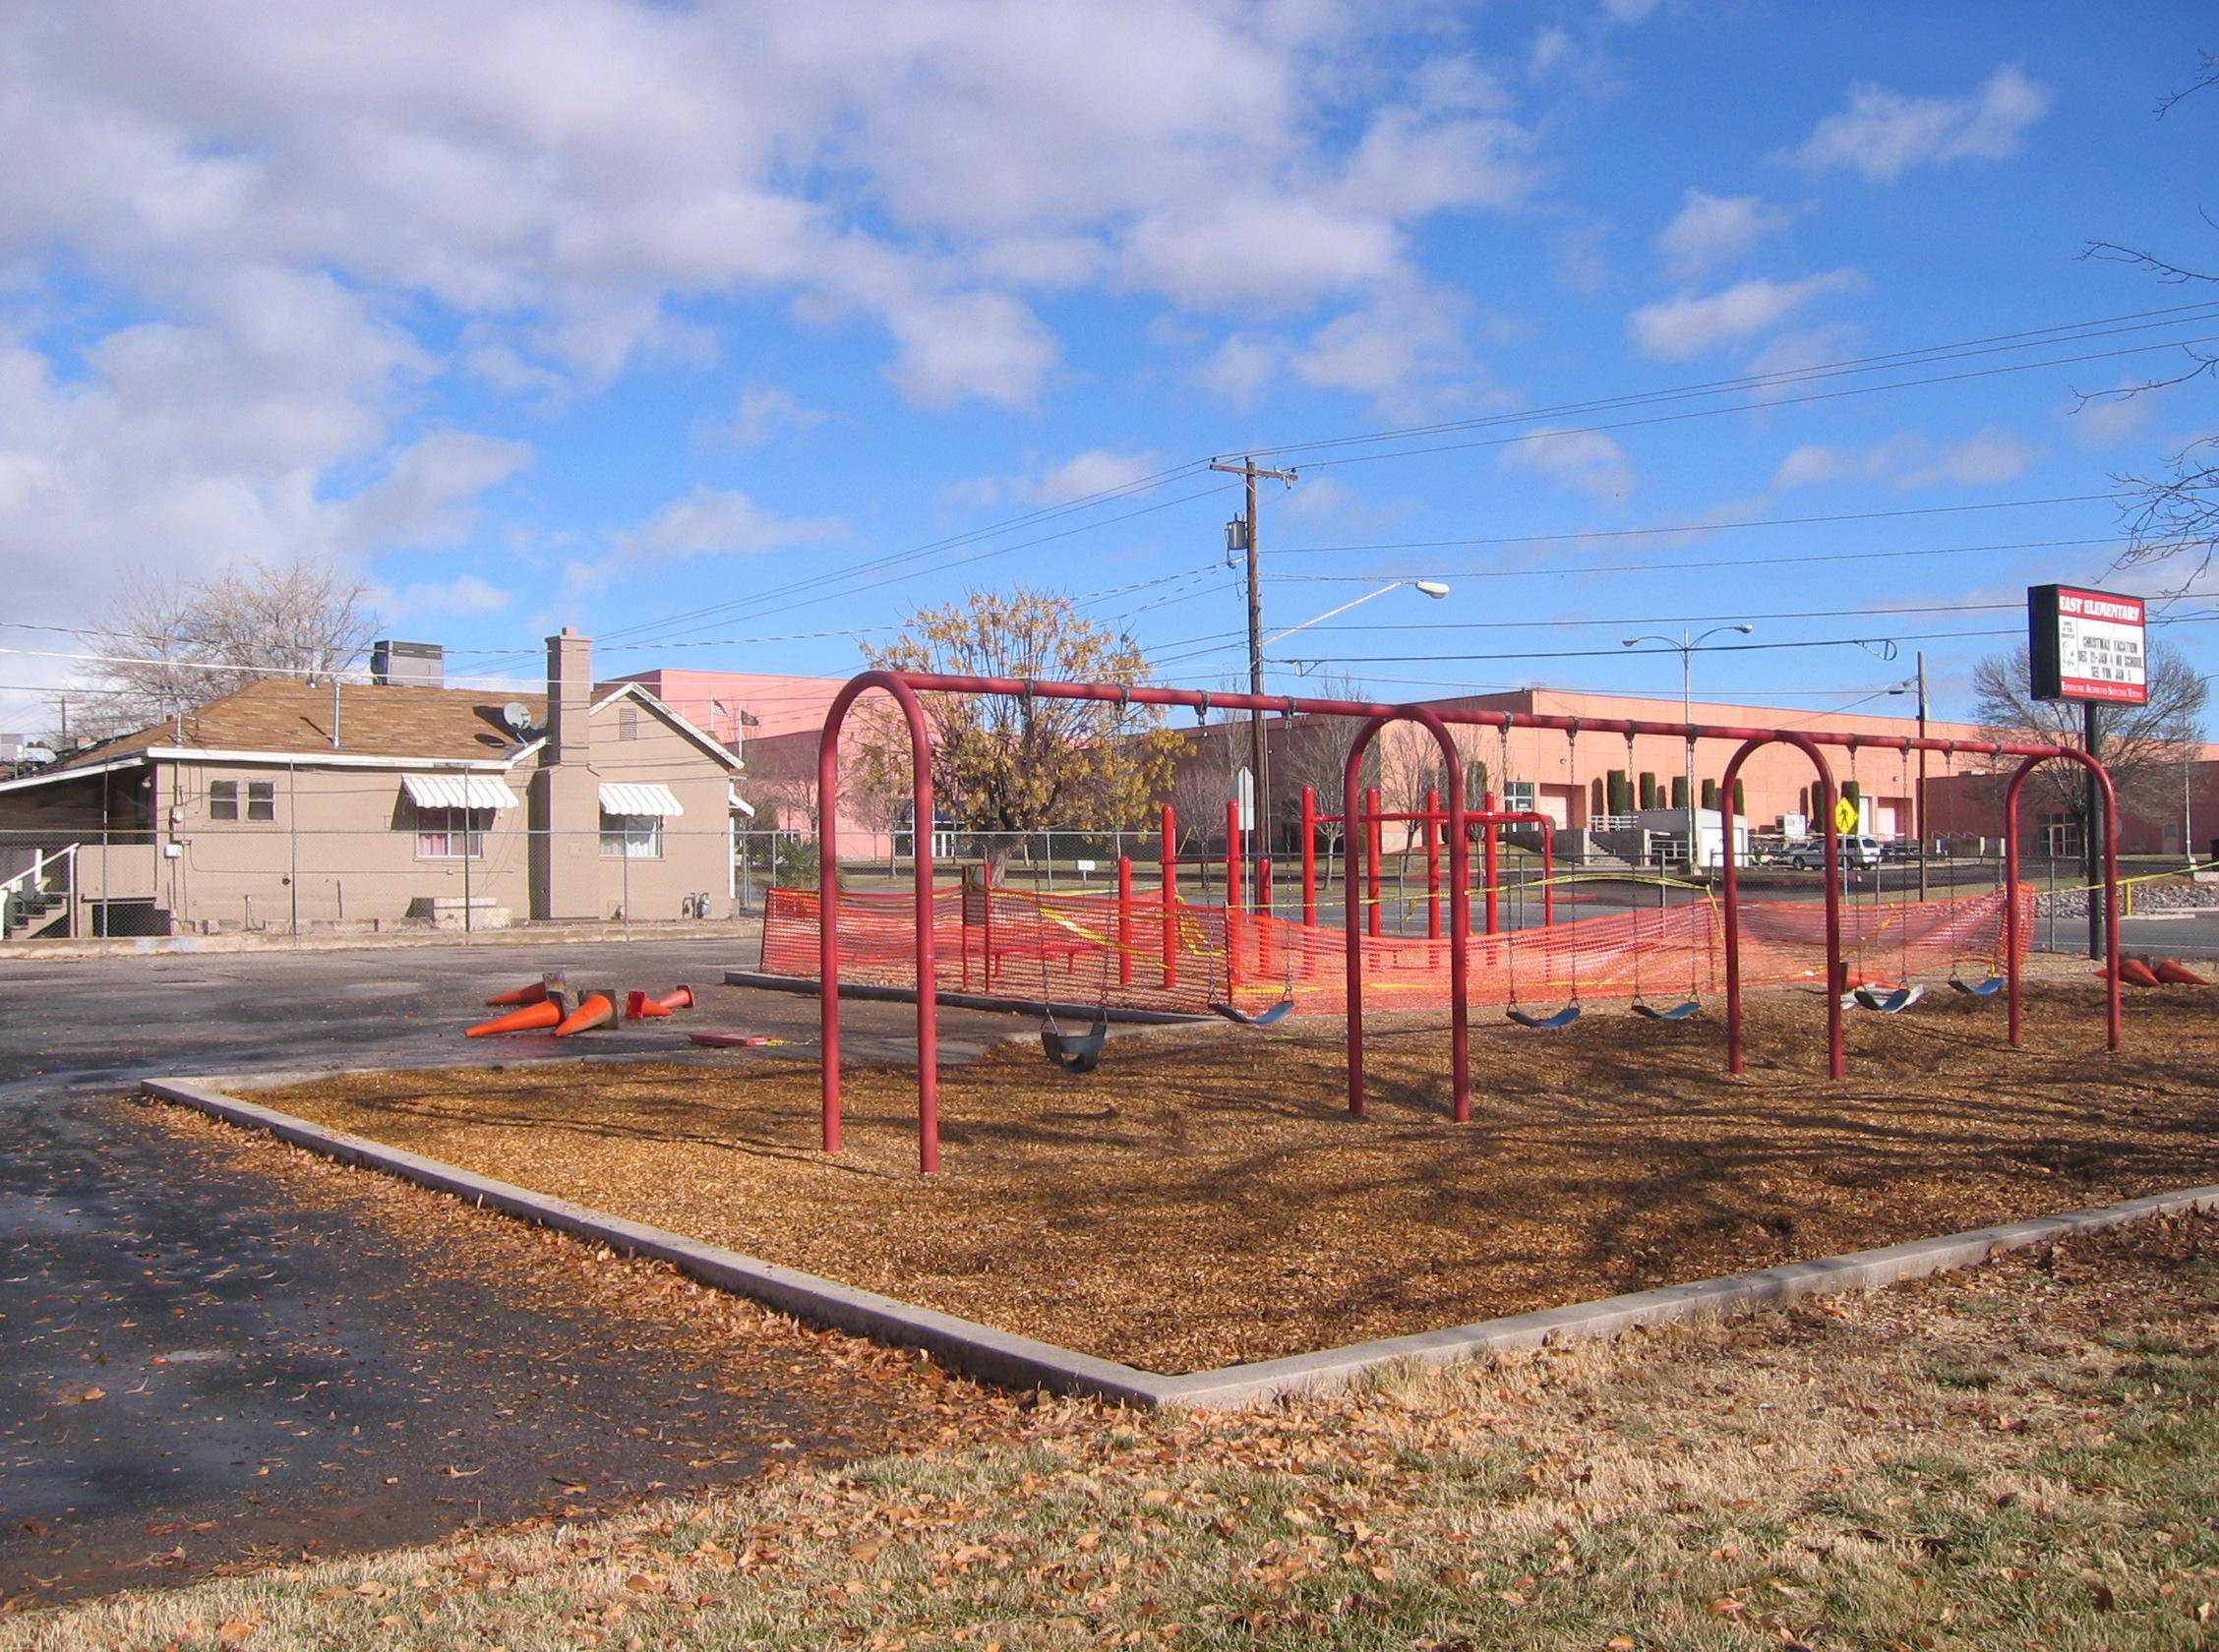 Swings and sign on the east side of East Elementary School